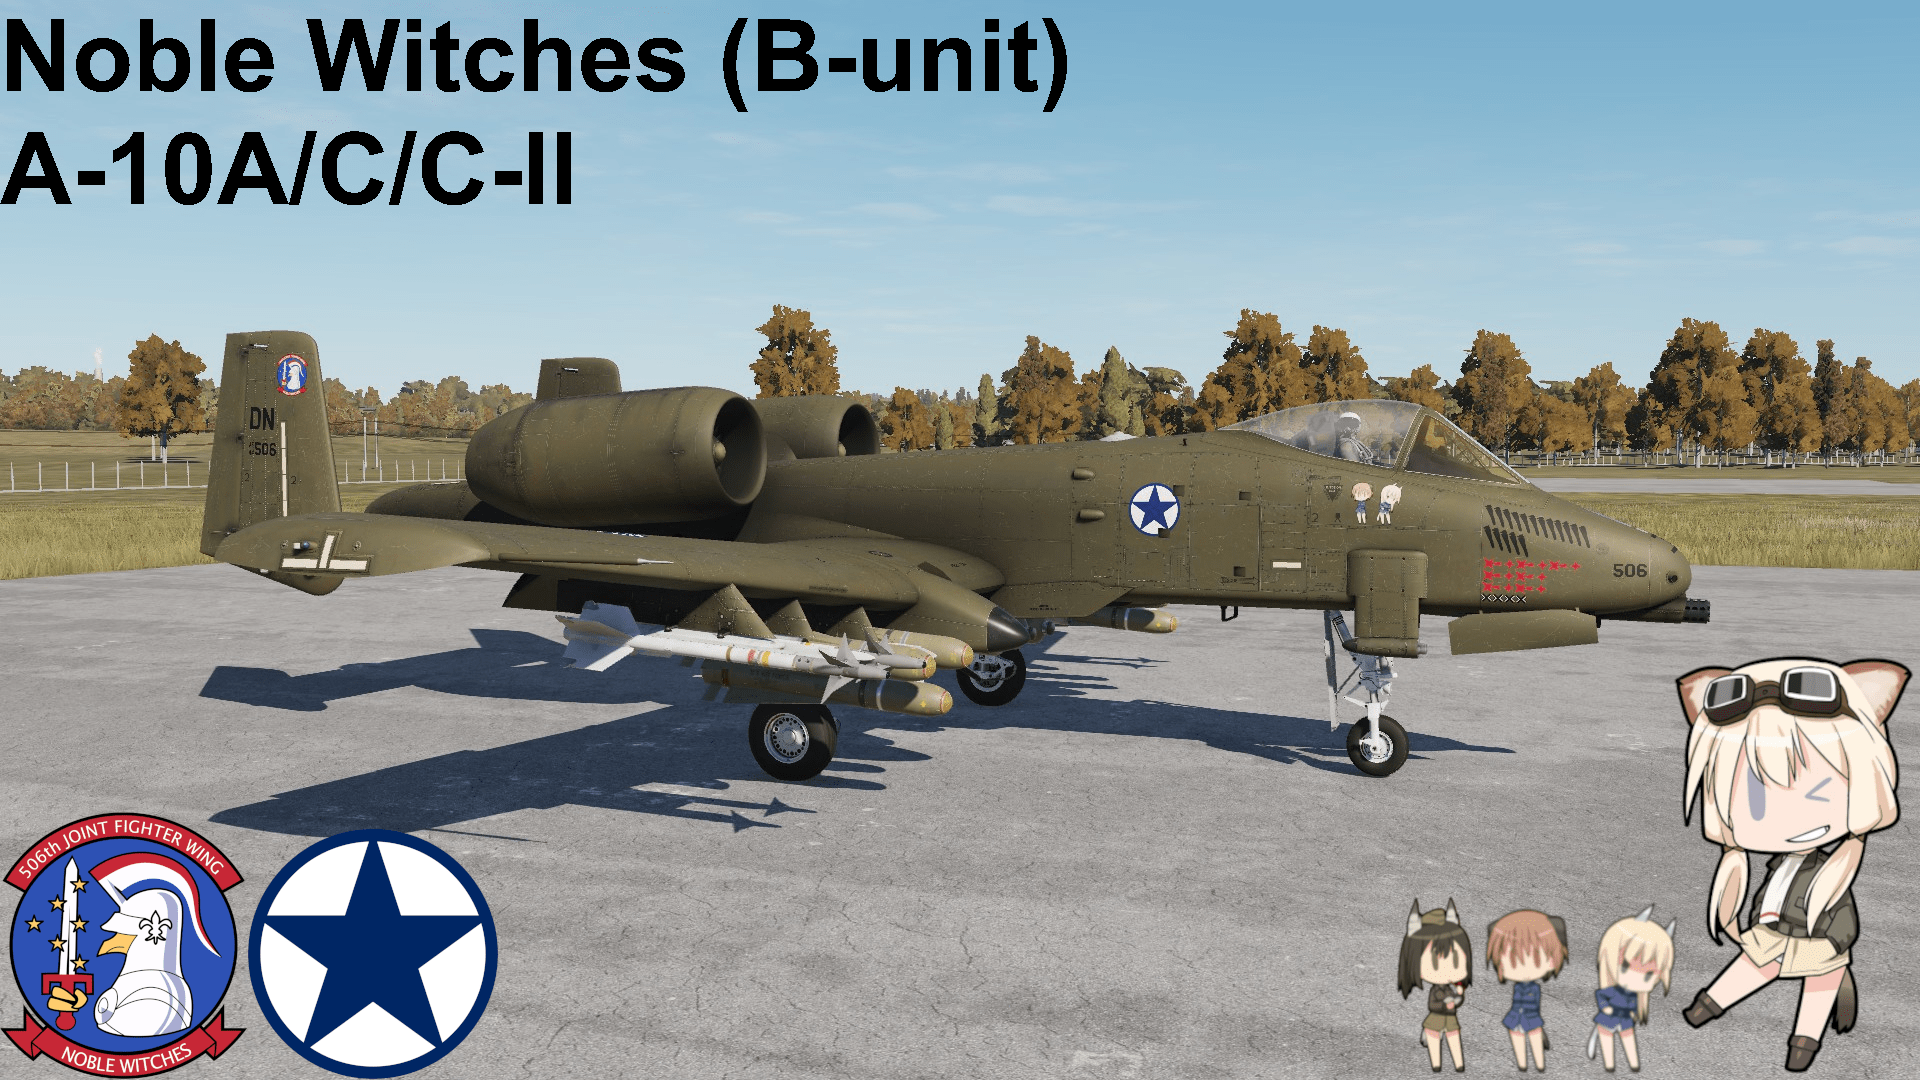 (OLD AND GARBAGE) World Witches - 506th JFW "Noble Witches (B-unit)" A-10C II